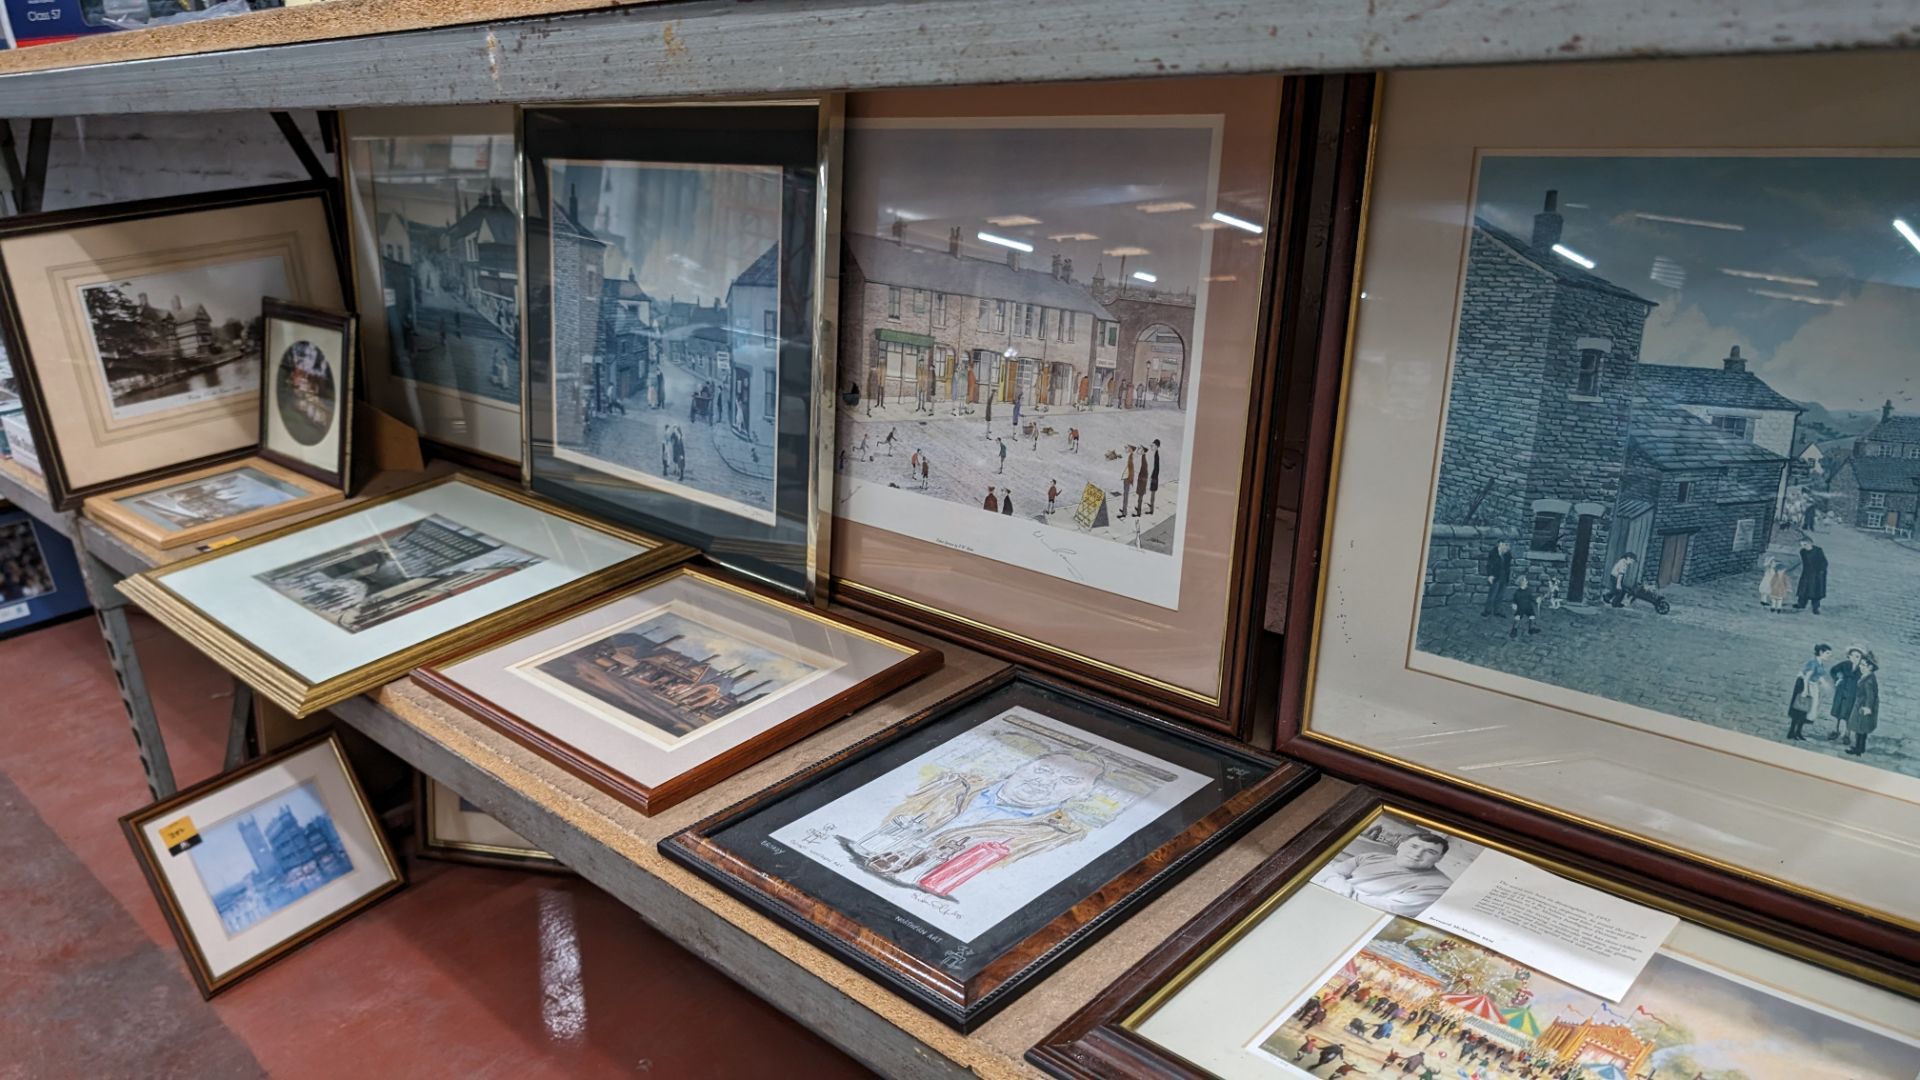 The contents of a bay of framed prints & pictures including reproduction Lowry, vintage photographs, - Image 13 of 14